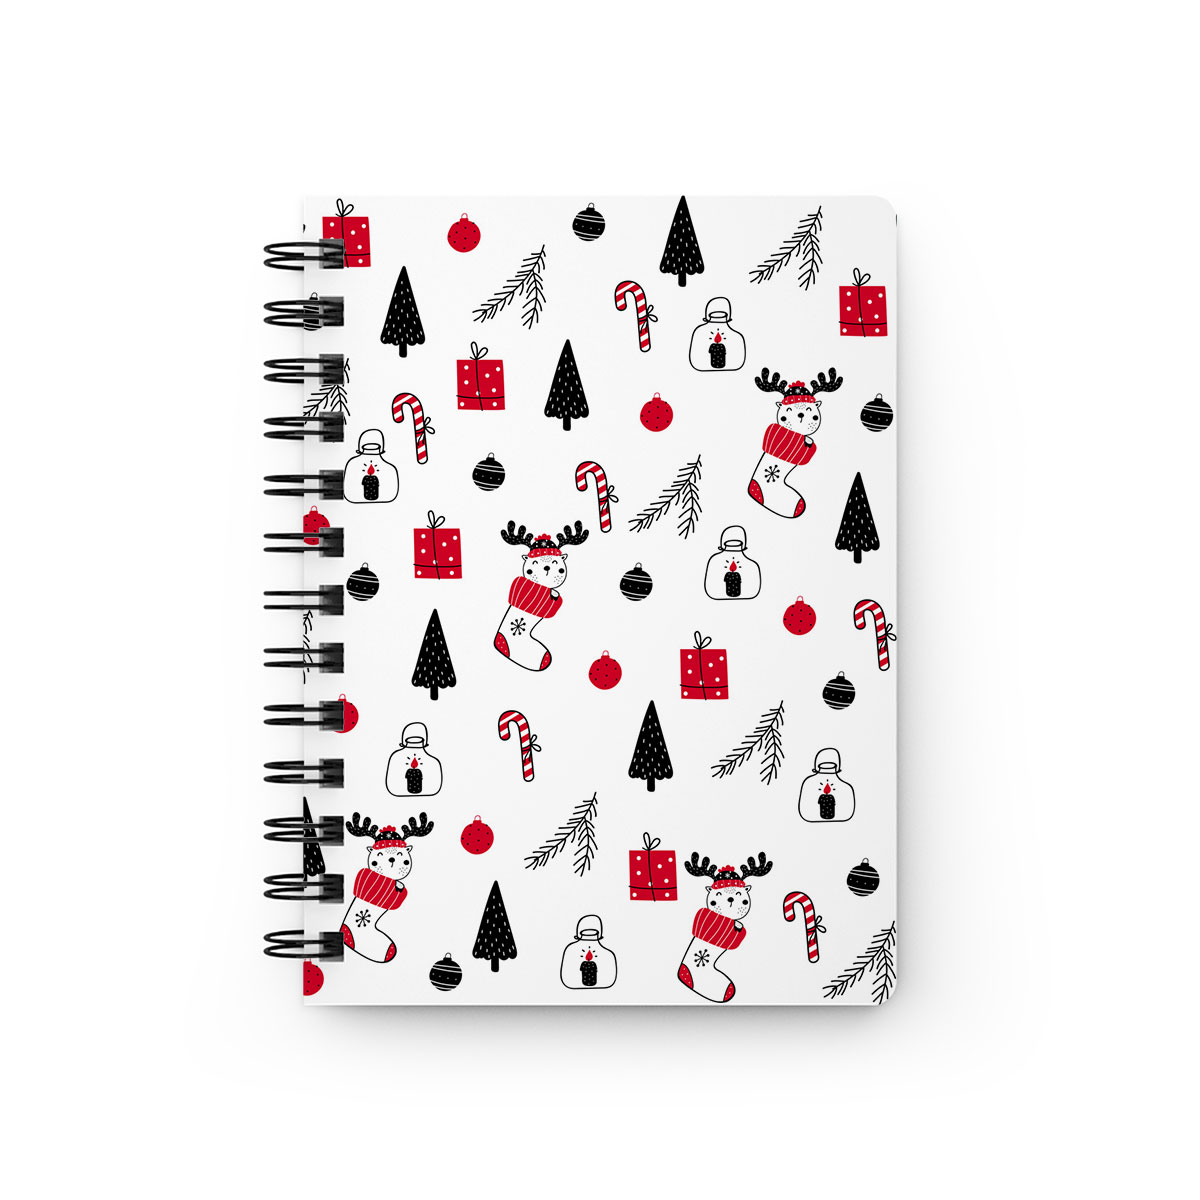 Reindeer Clipart In Hand Drawn Red Socks, Christmas Balls, Candy Canes, And Christmas Gifts Seamless White Pattern Spiral Bound Journal